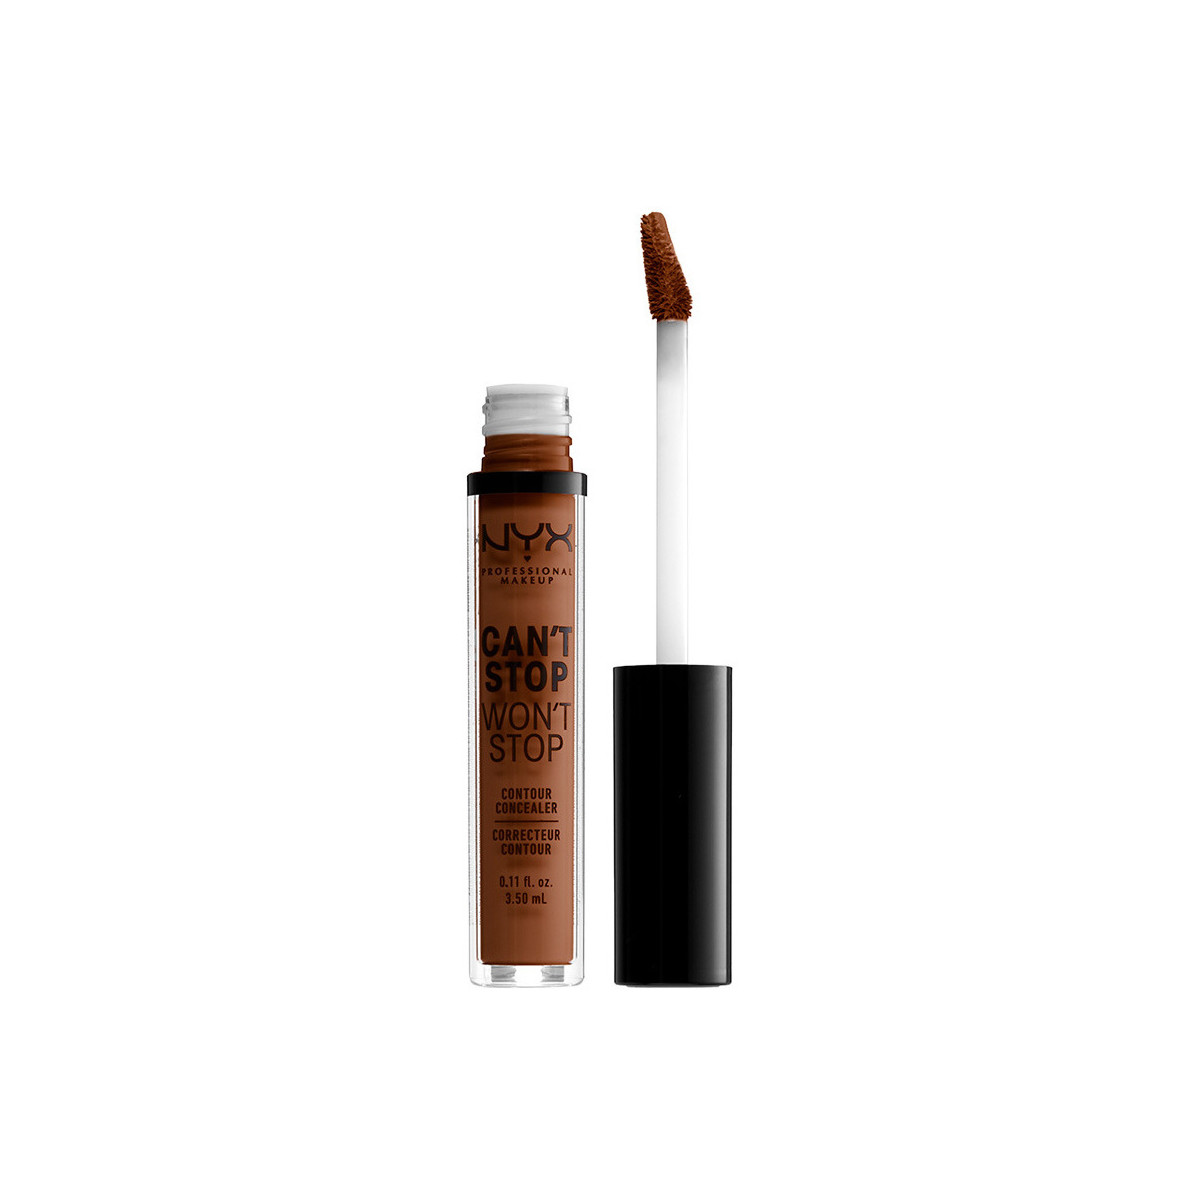 Beauty Make-up & Foundation  Nyx Professional Make Up Can't Stop Won't Stop Contour Concealer mocha 